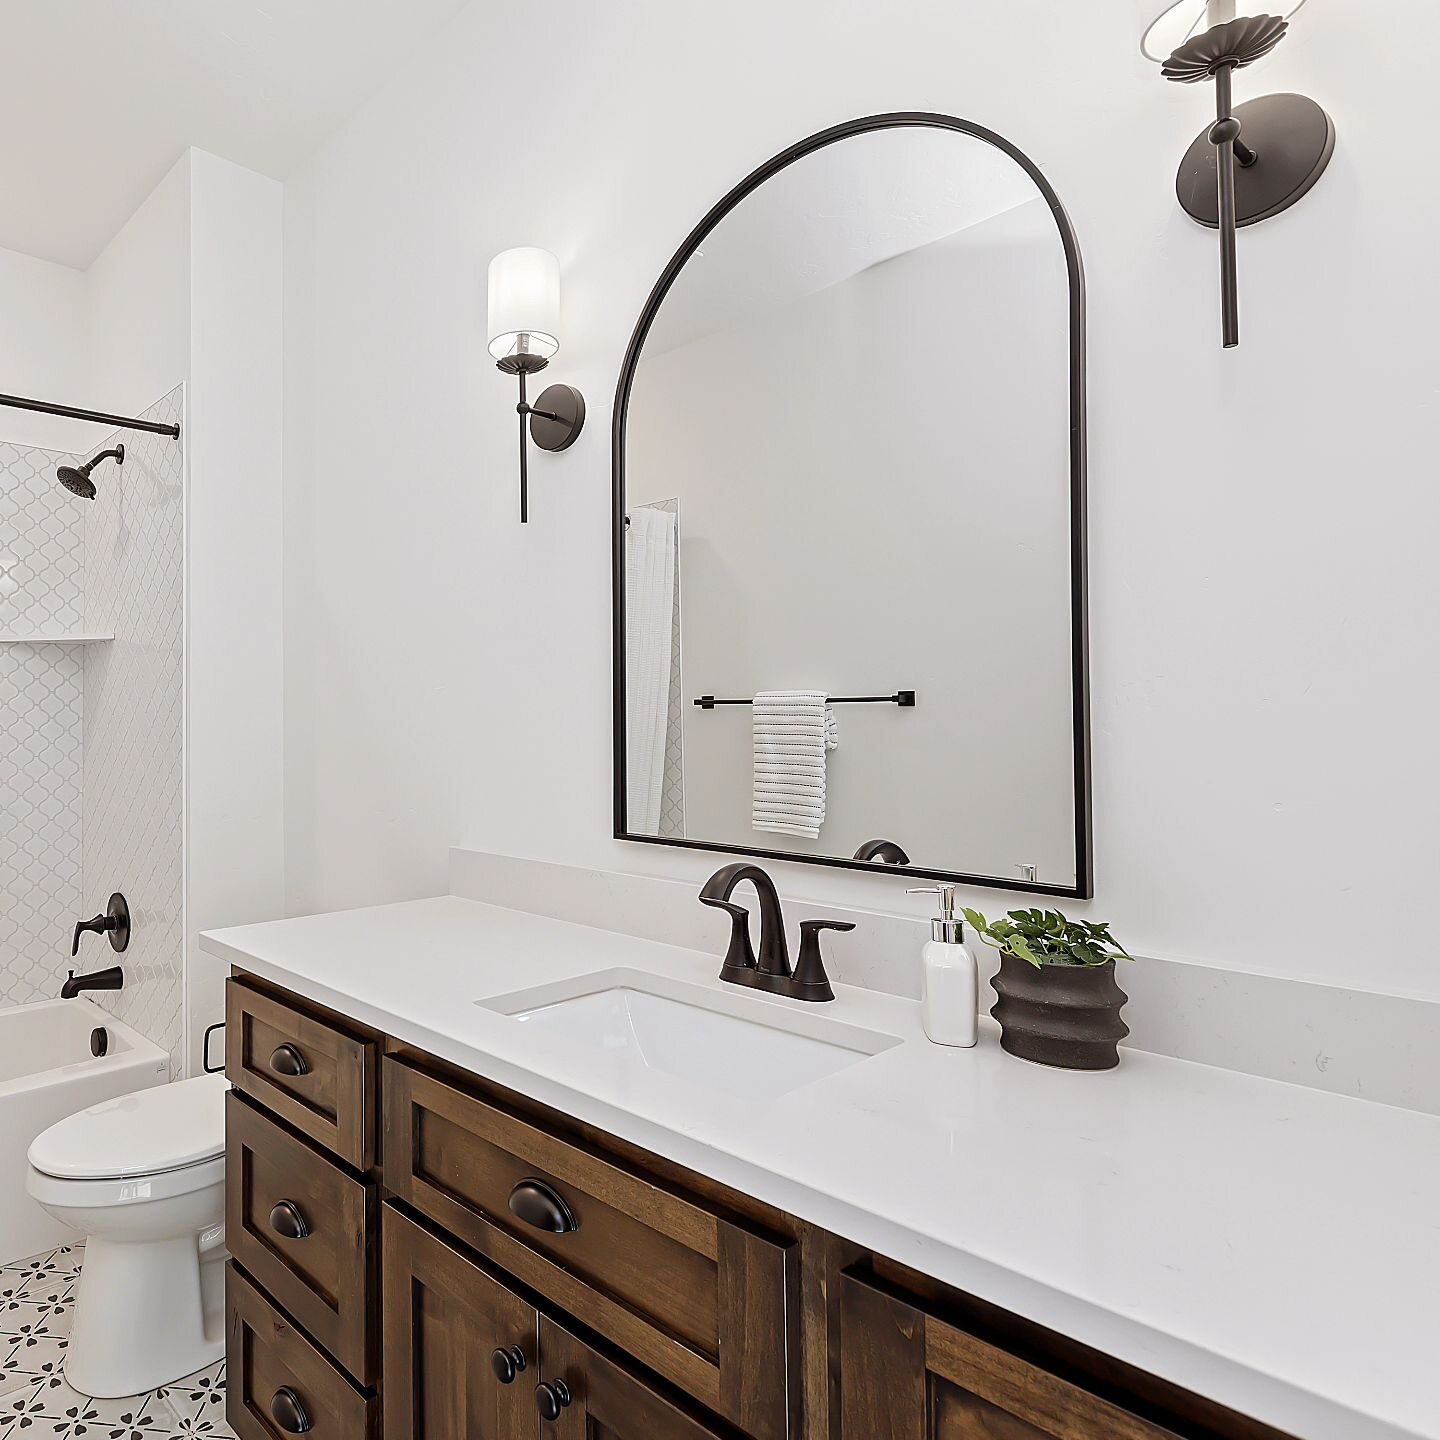 I love the use of accent mirrors in bathrooms. 🛁 Adds a cute touch while remaining cost effective and leaves room for sconce lighting on the sides of the mirror. 💡